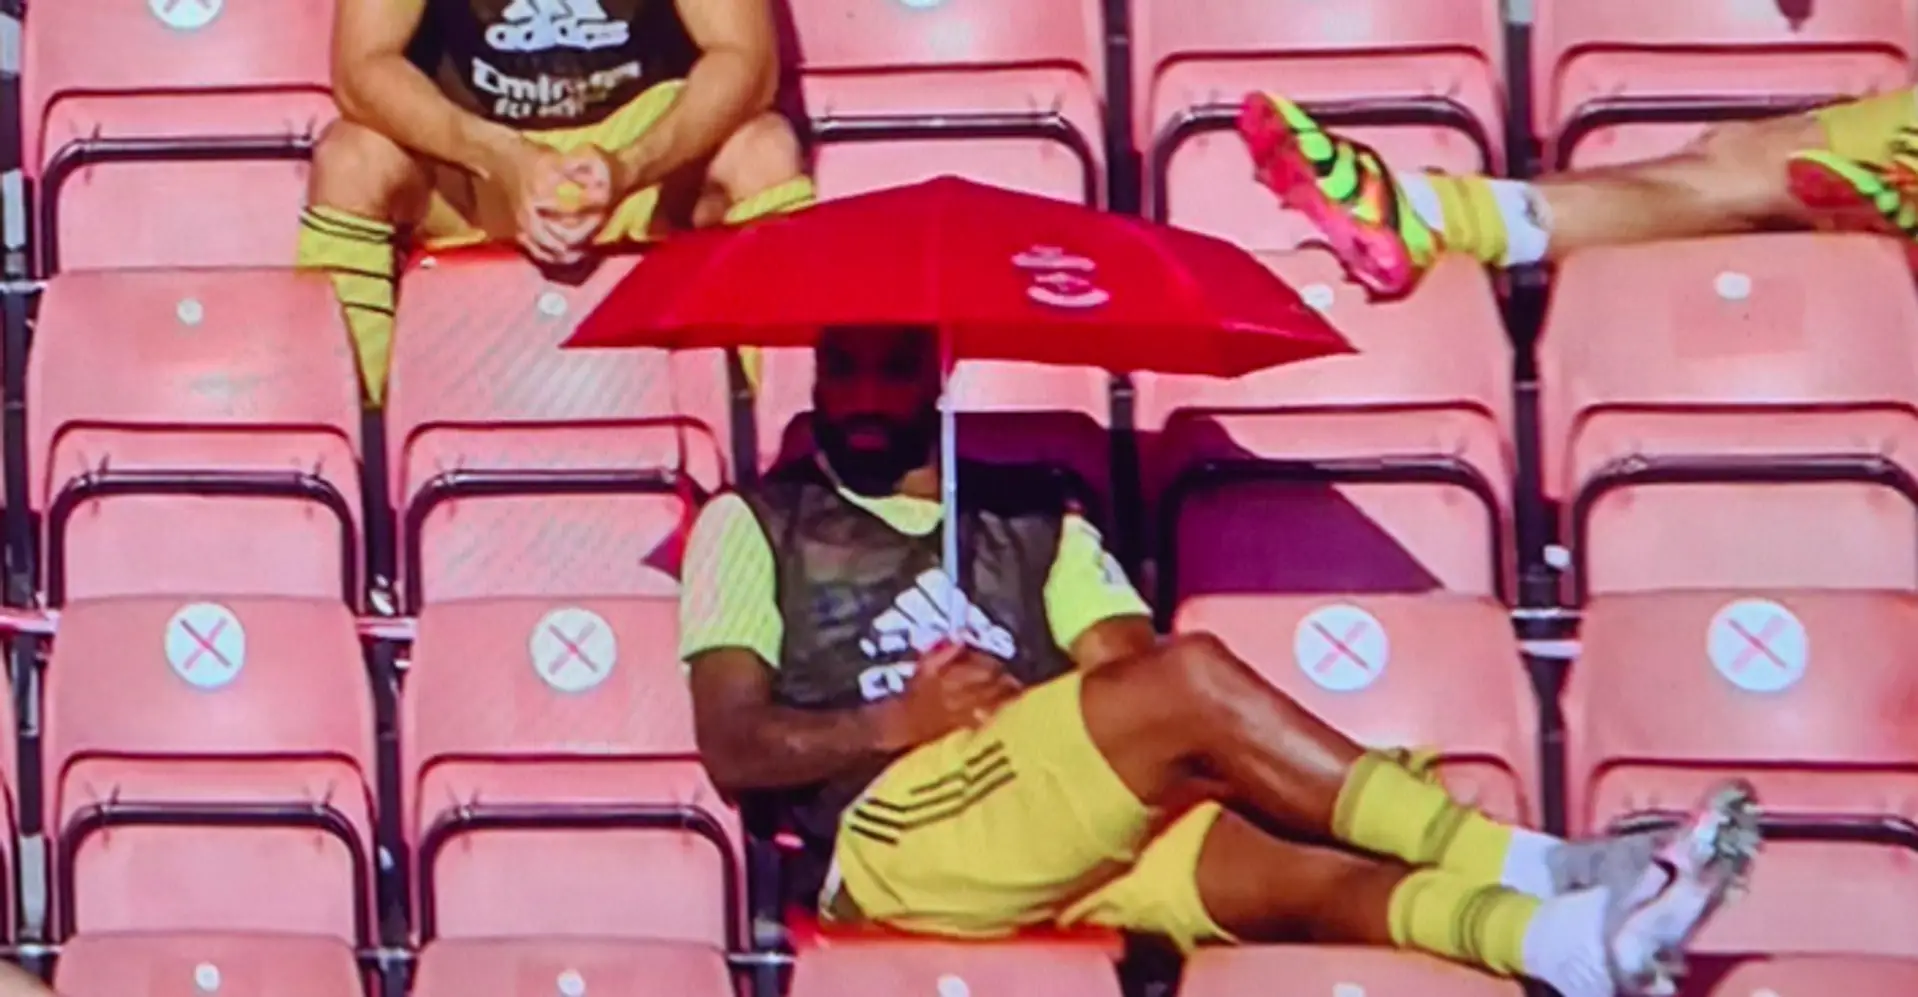 Alexandre Lacazette found a perfect way to watch Arsenal games and immediately went viral